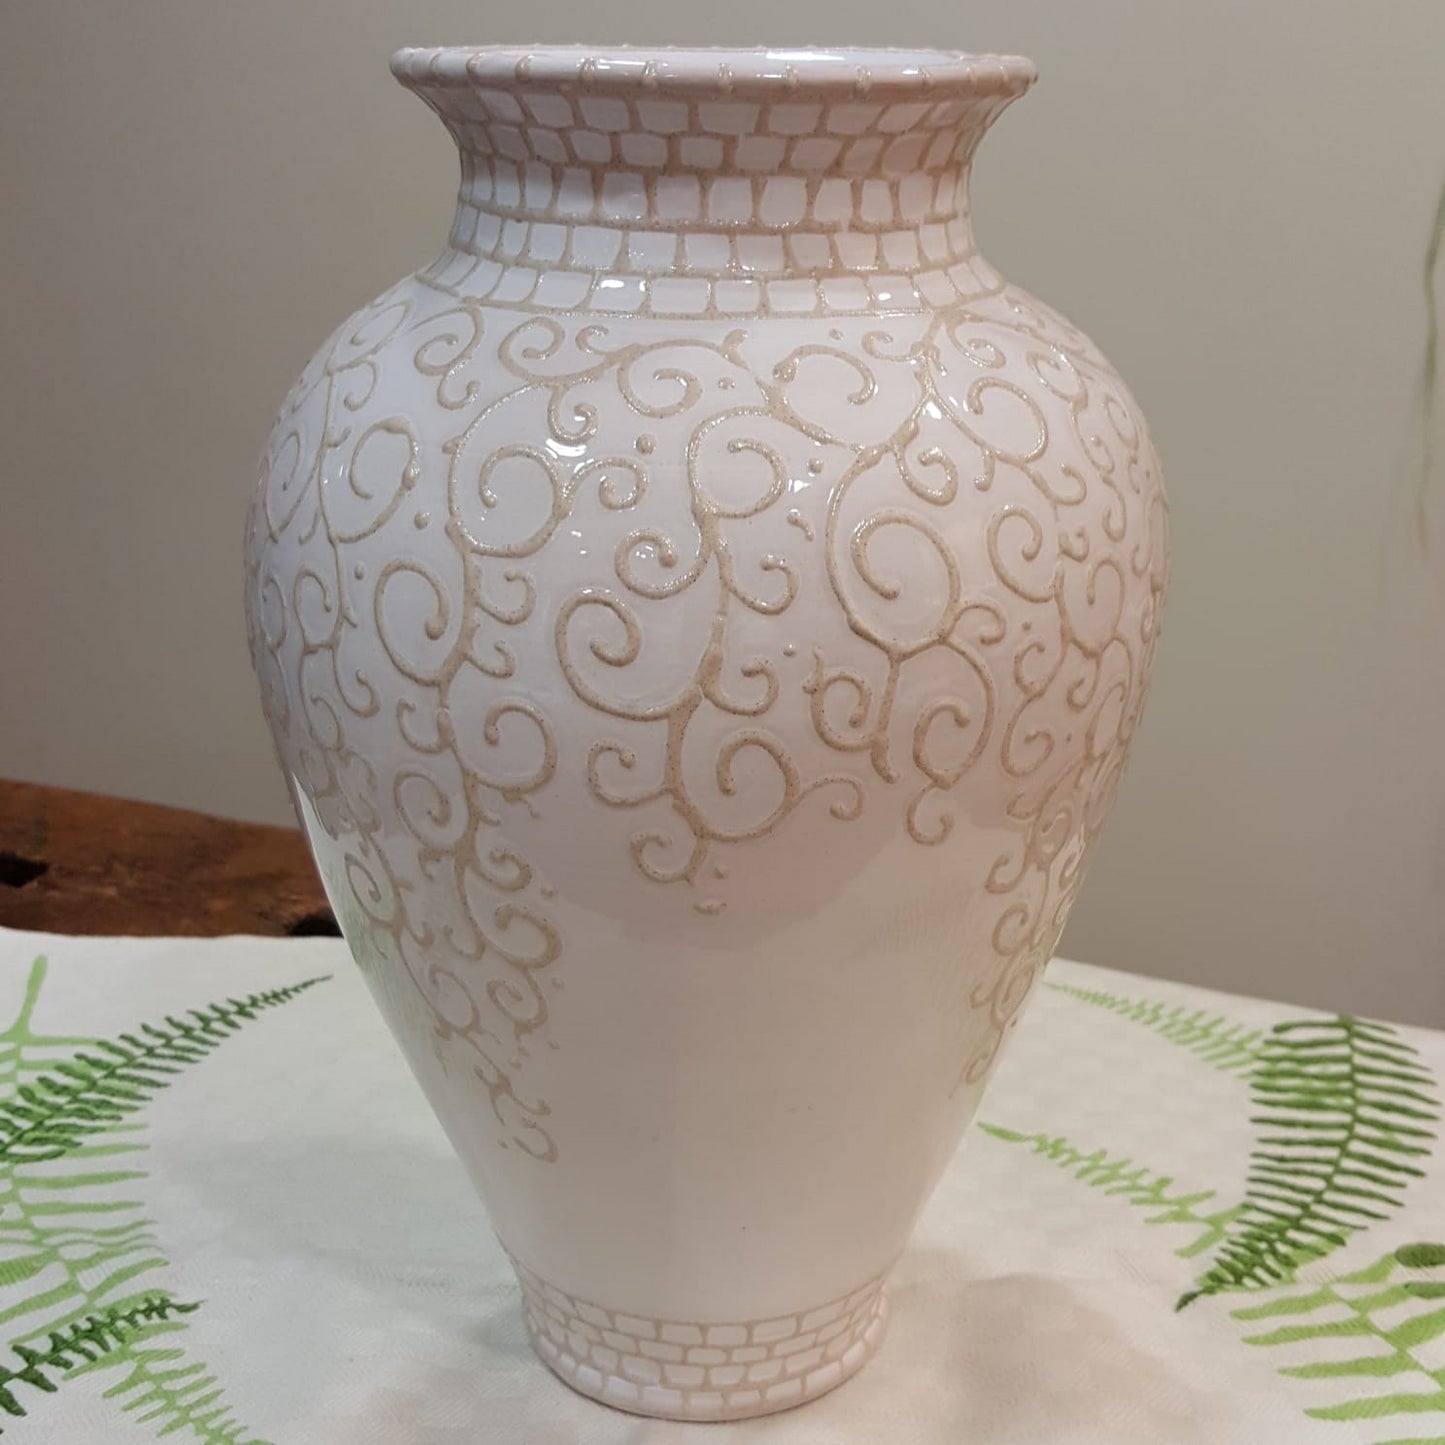 Ceramic vase with embroidery decoration